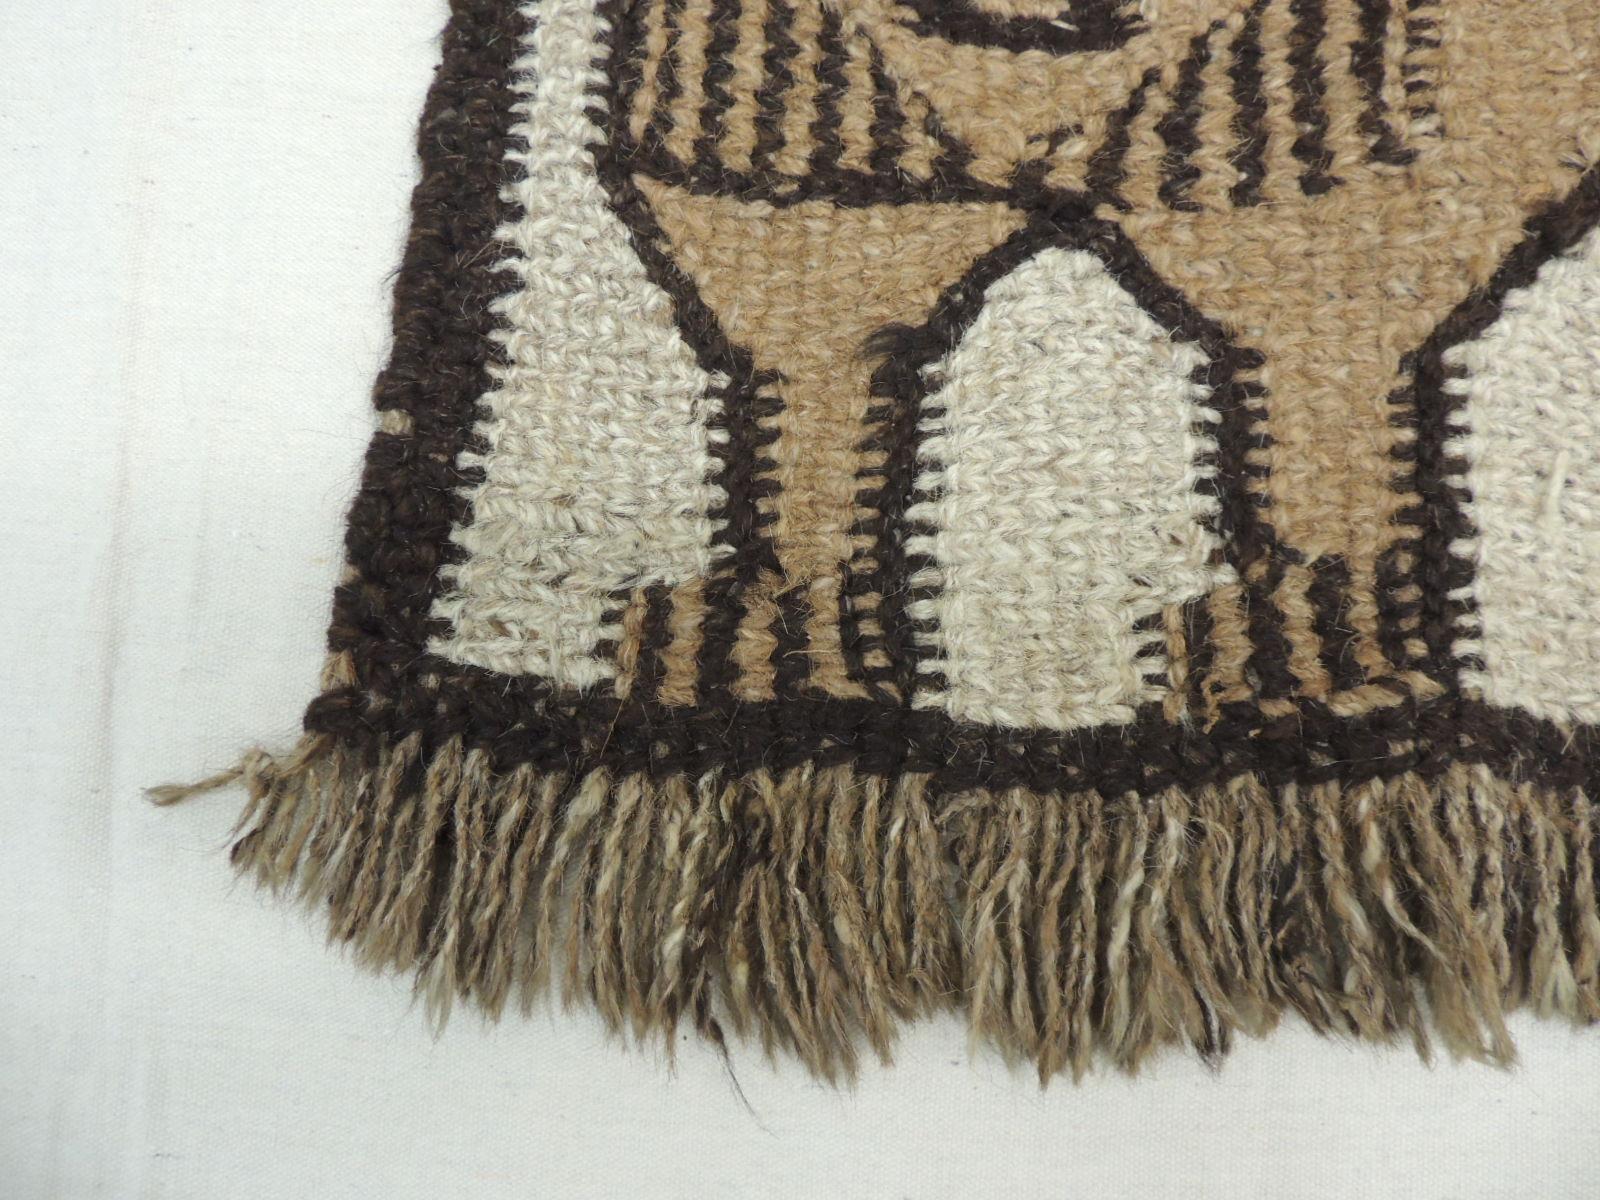 Vintage African woven decorative rug with handwoven fringes
depicting a lion. In shades of brown, tan and natural
Size: 26